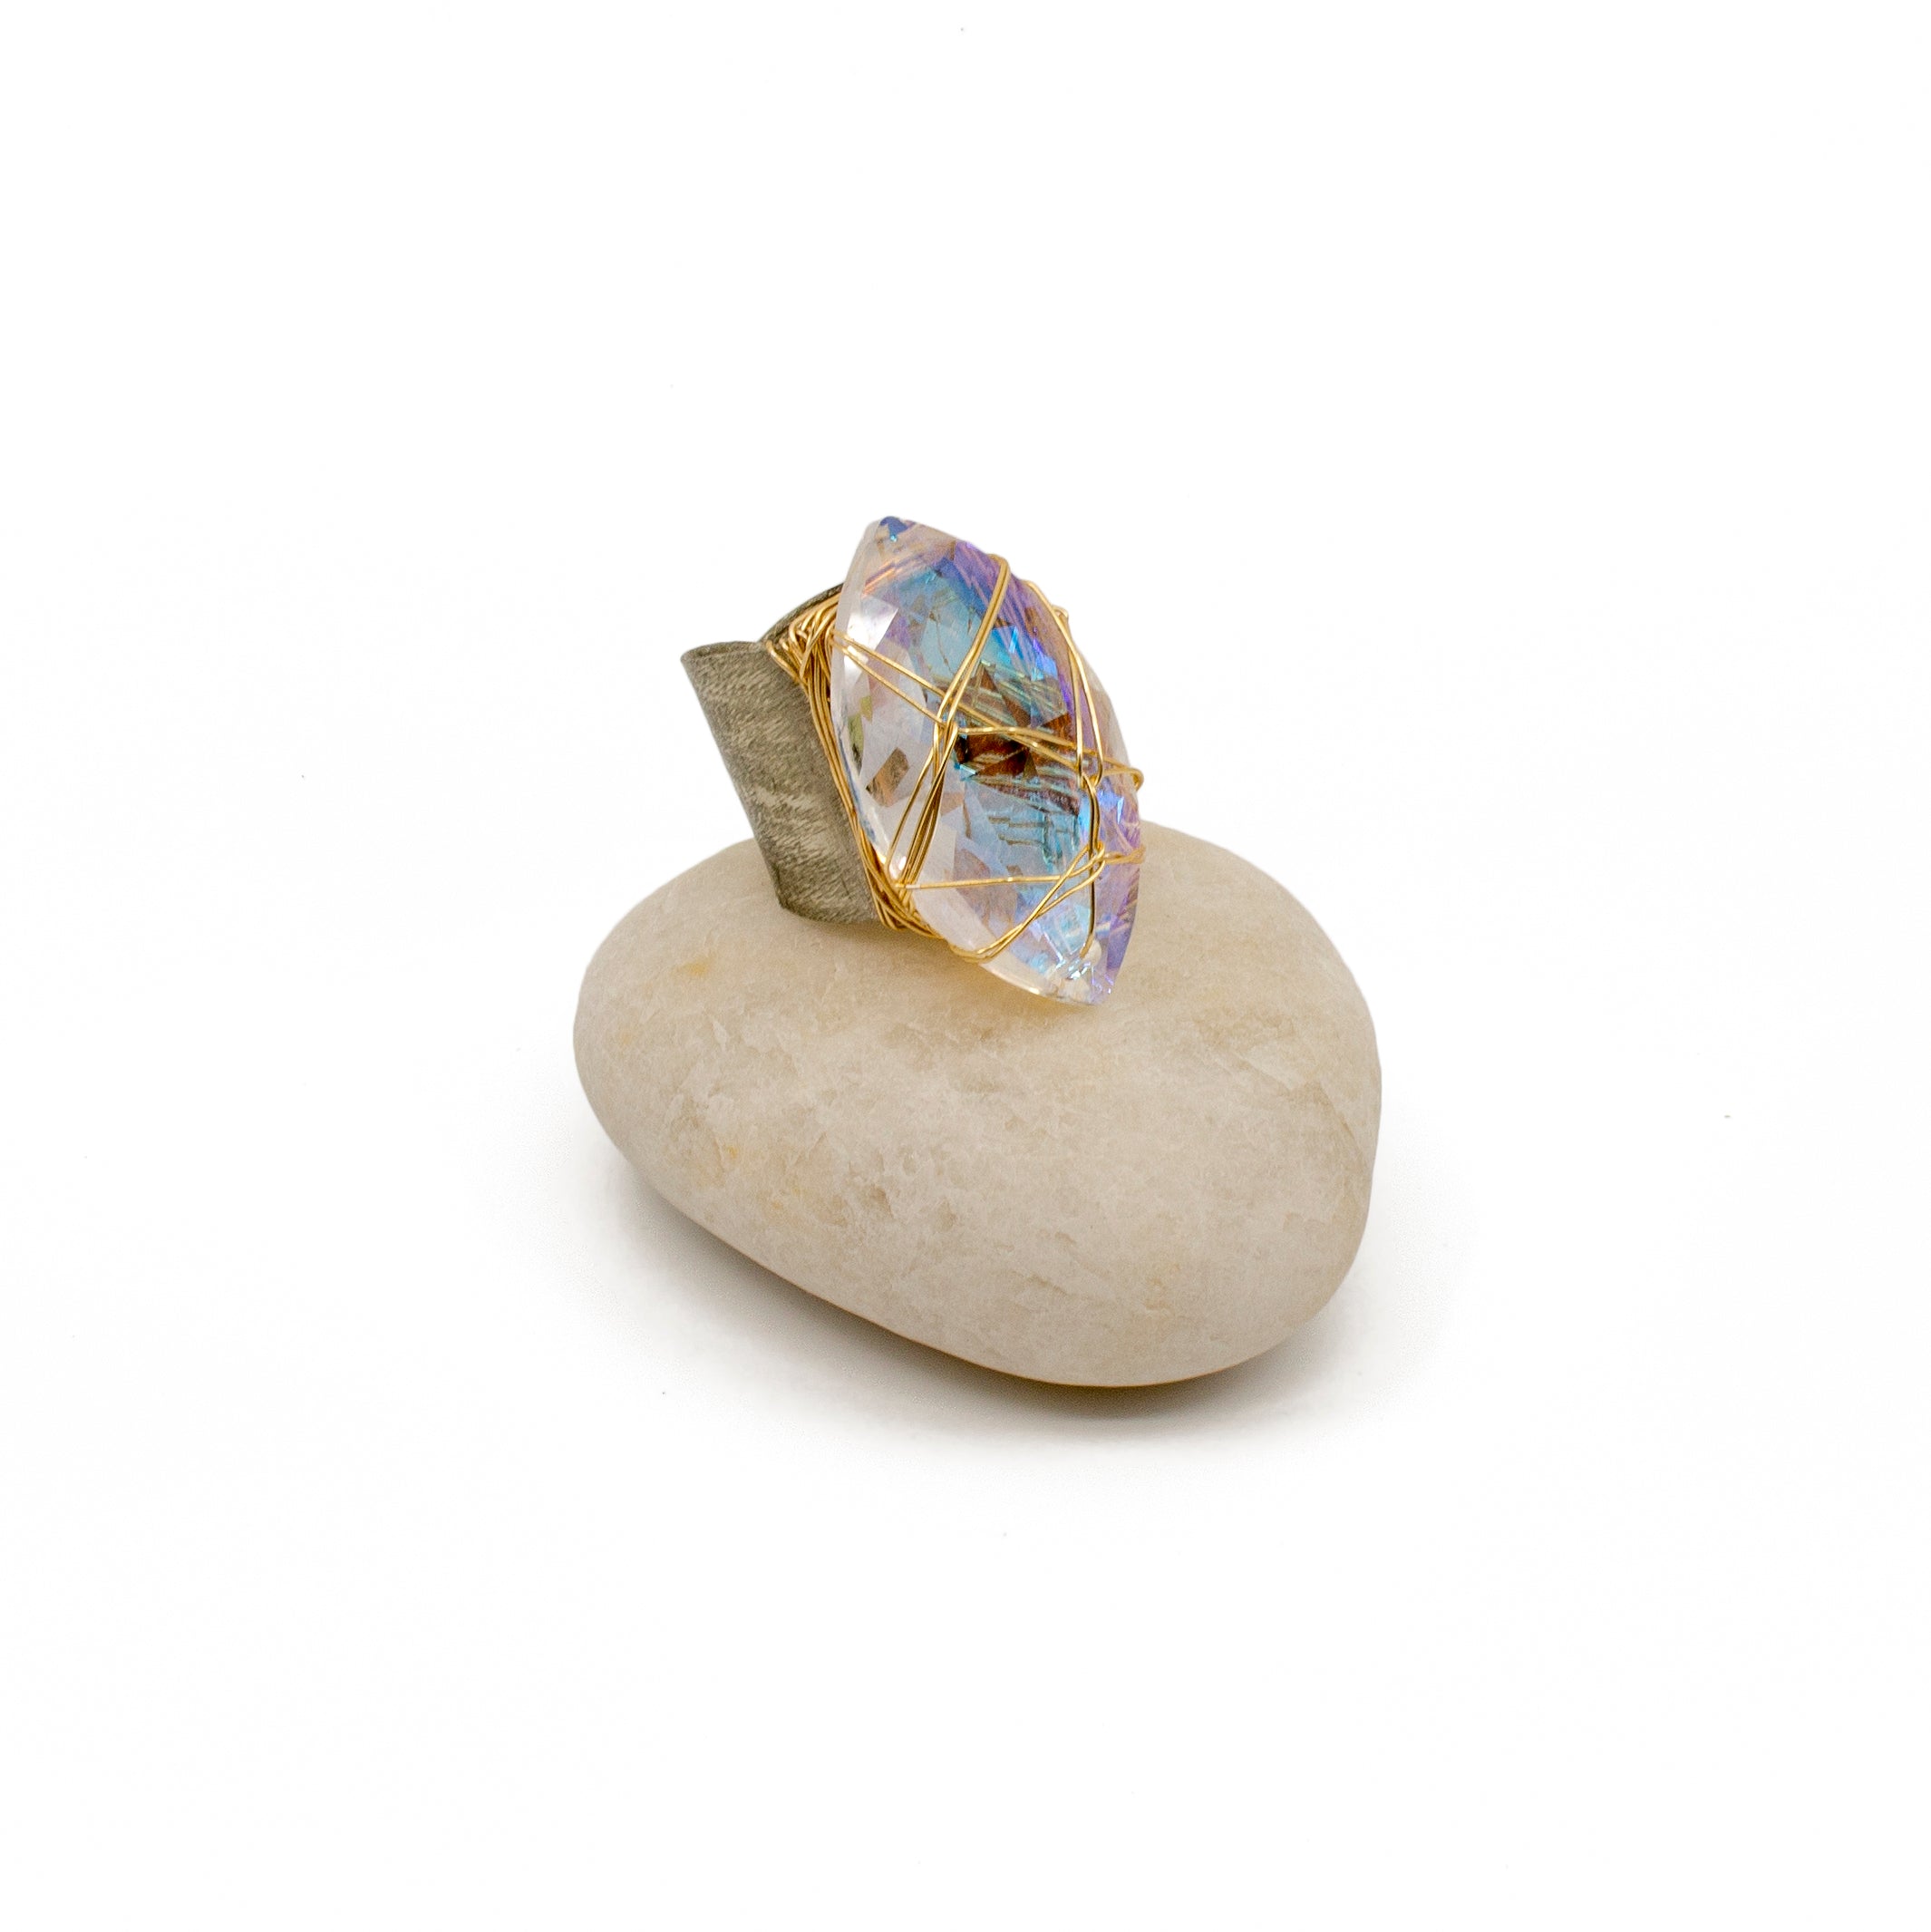 Hammered Silver Two-Toned Ring with Aurora Borealis Swarovski